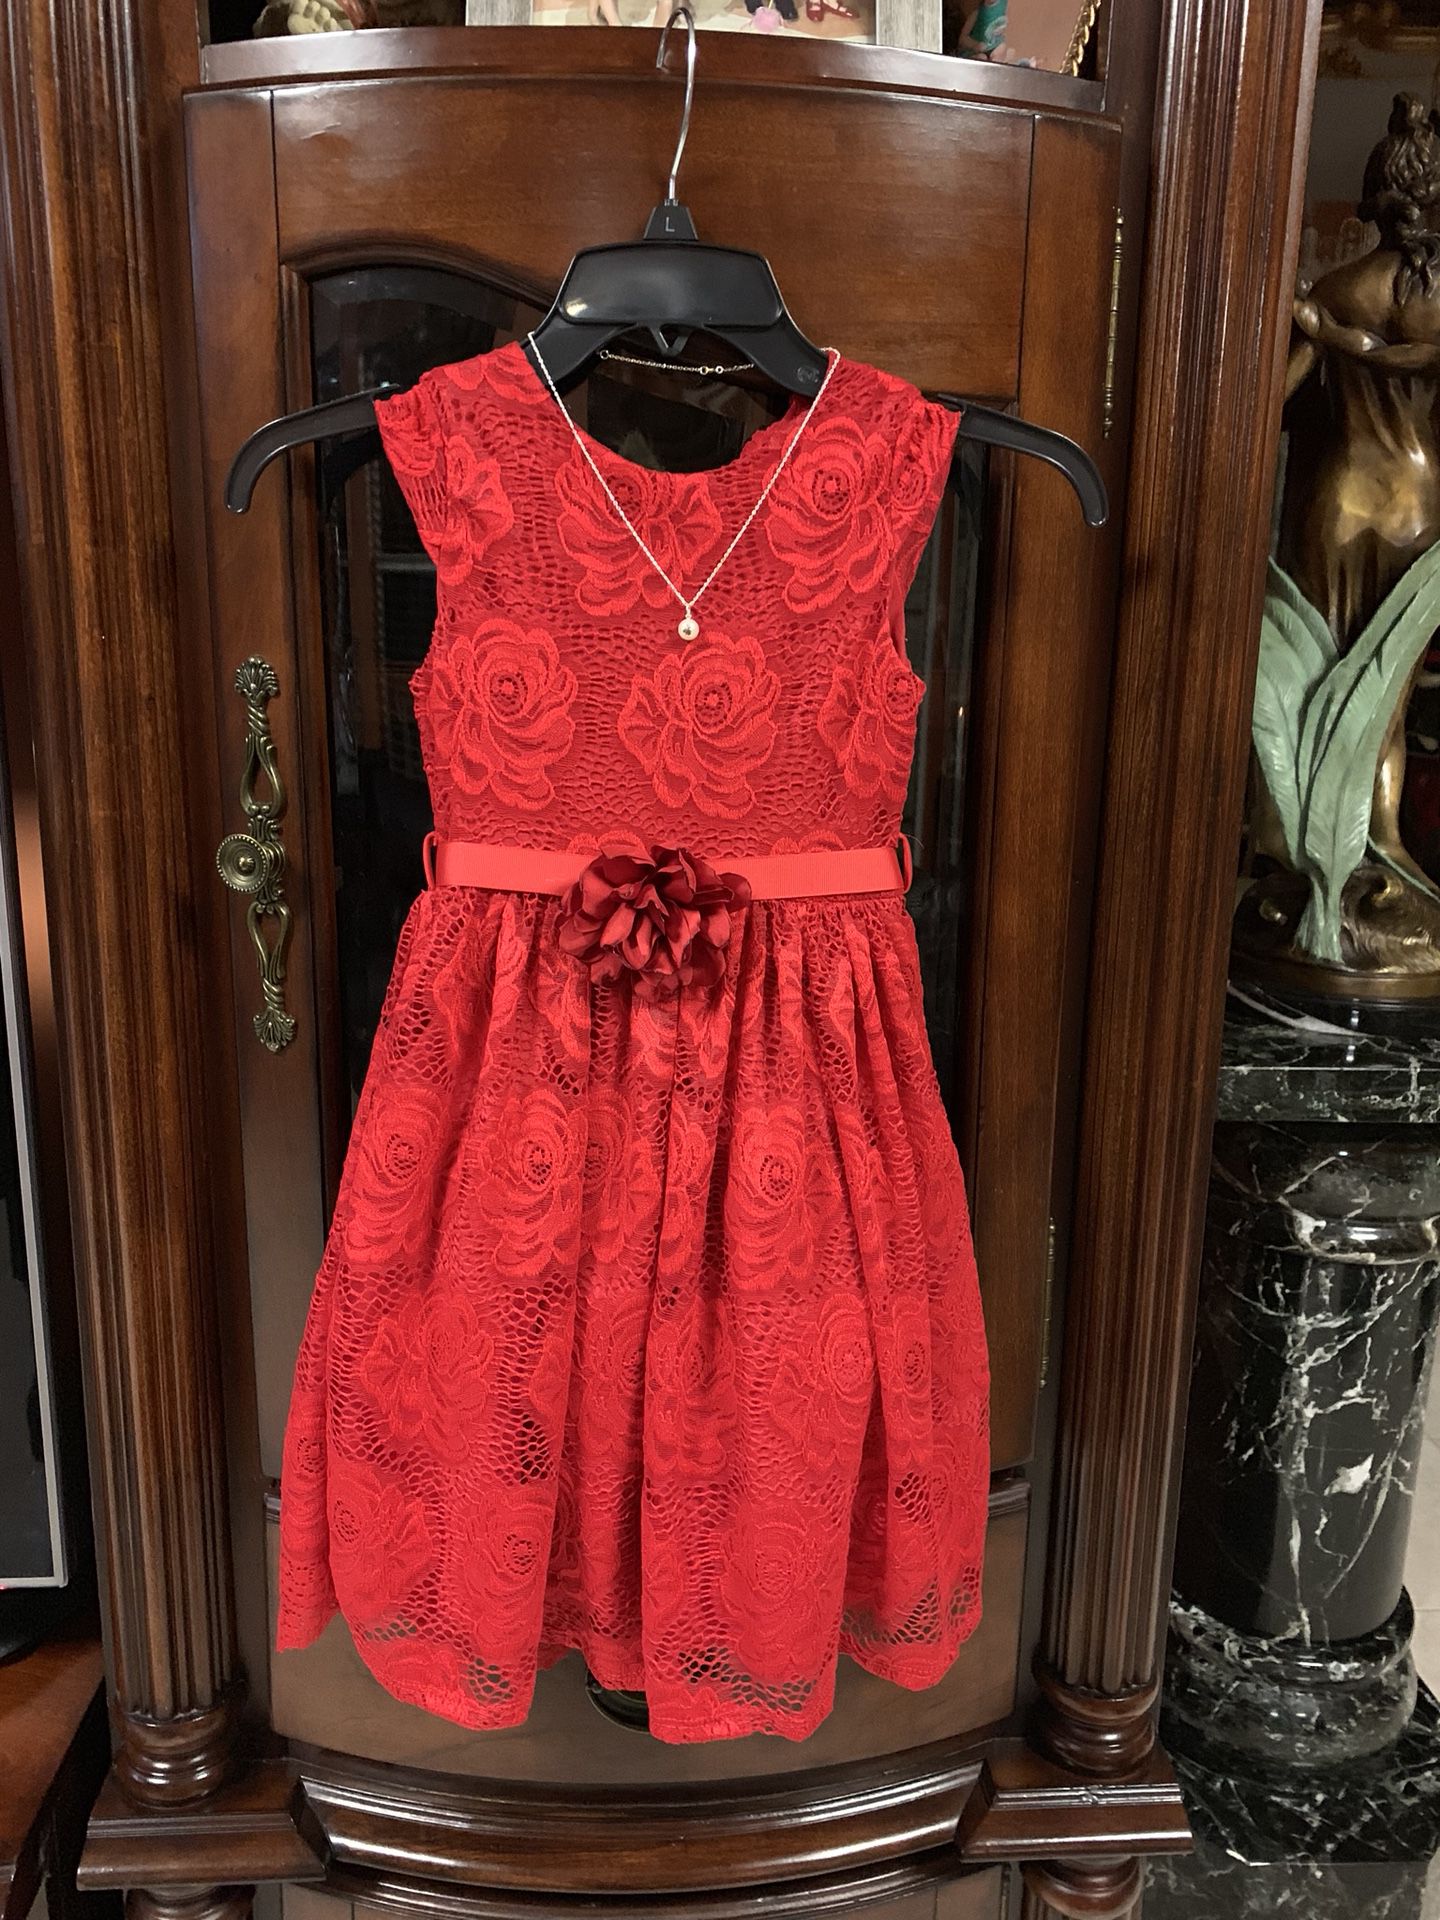 Red lace dress for girl size 6, $ 50.00